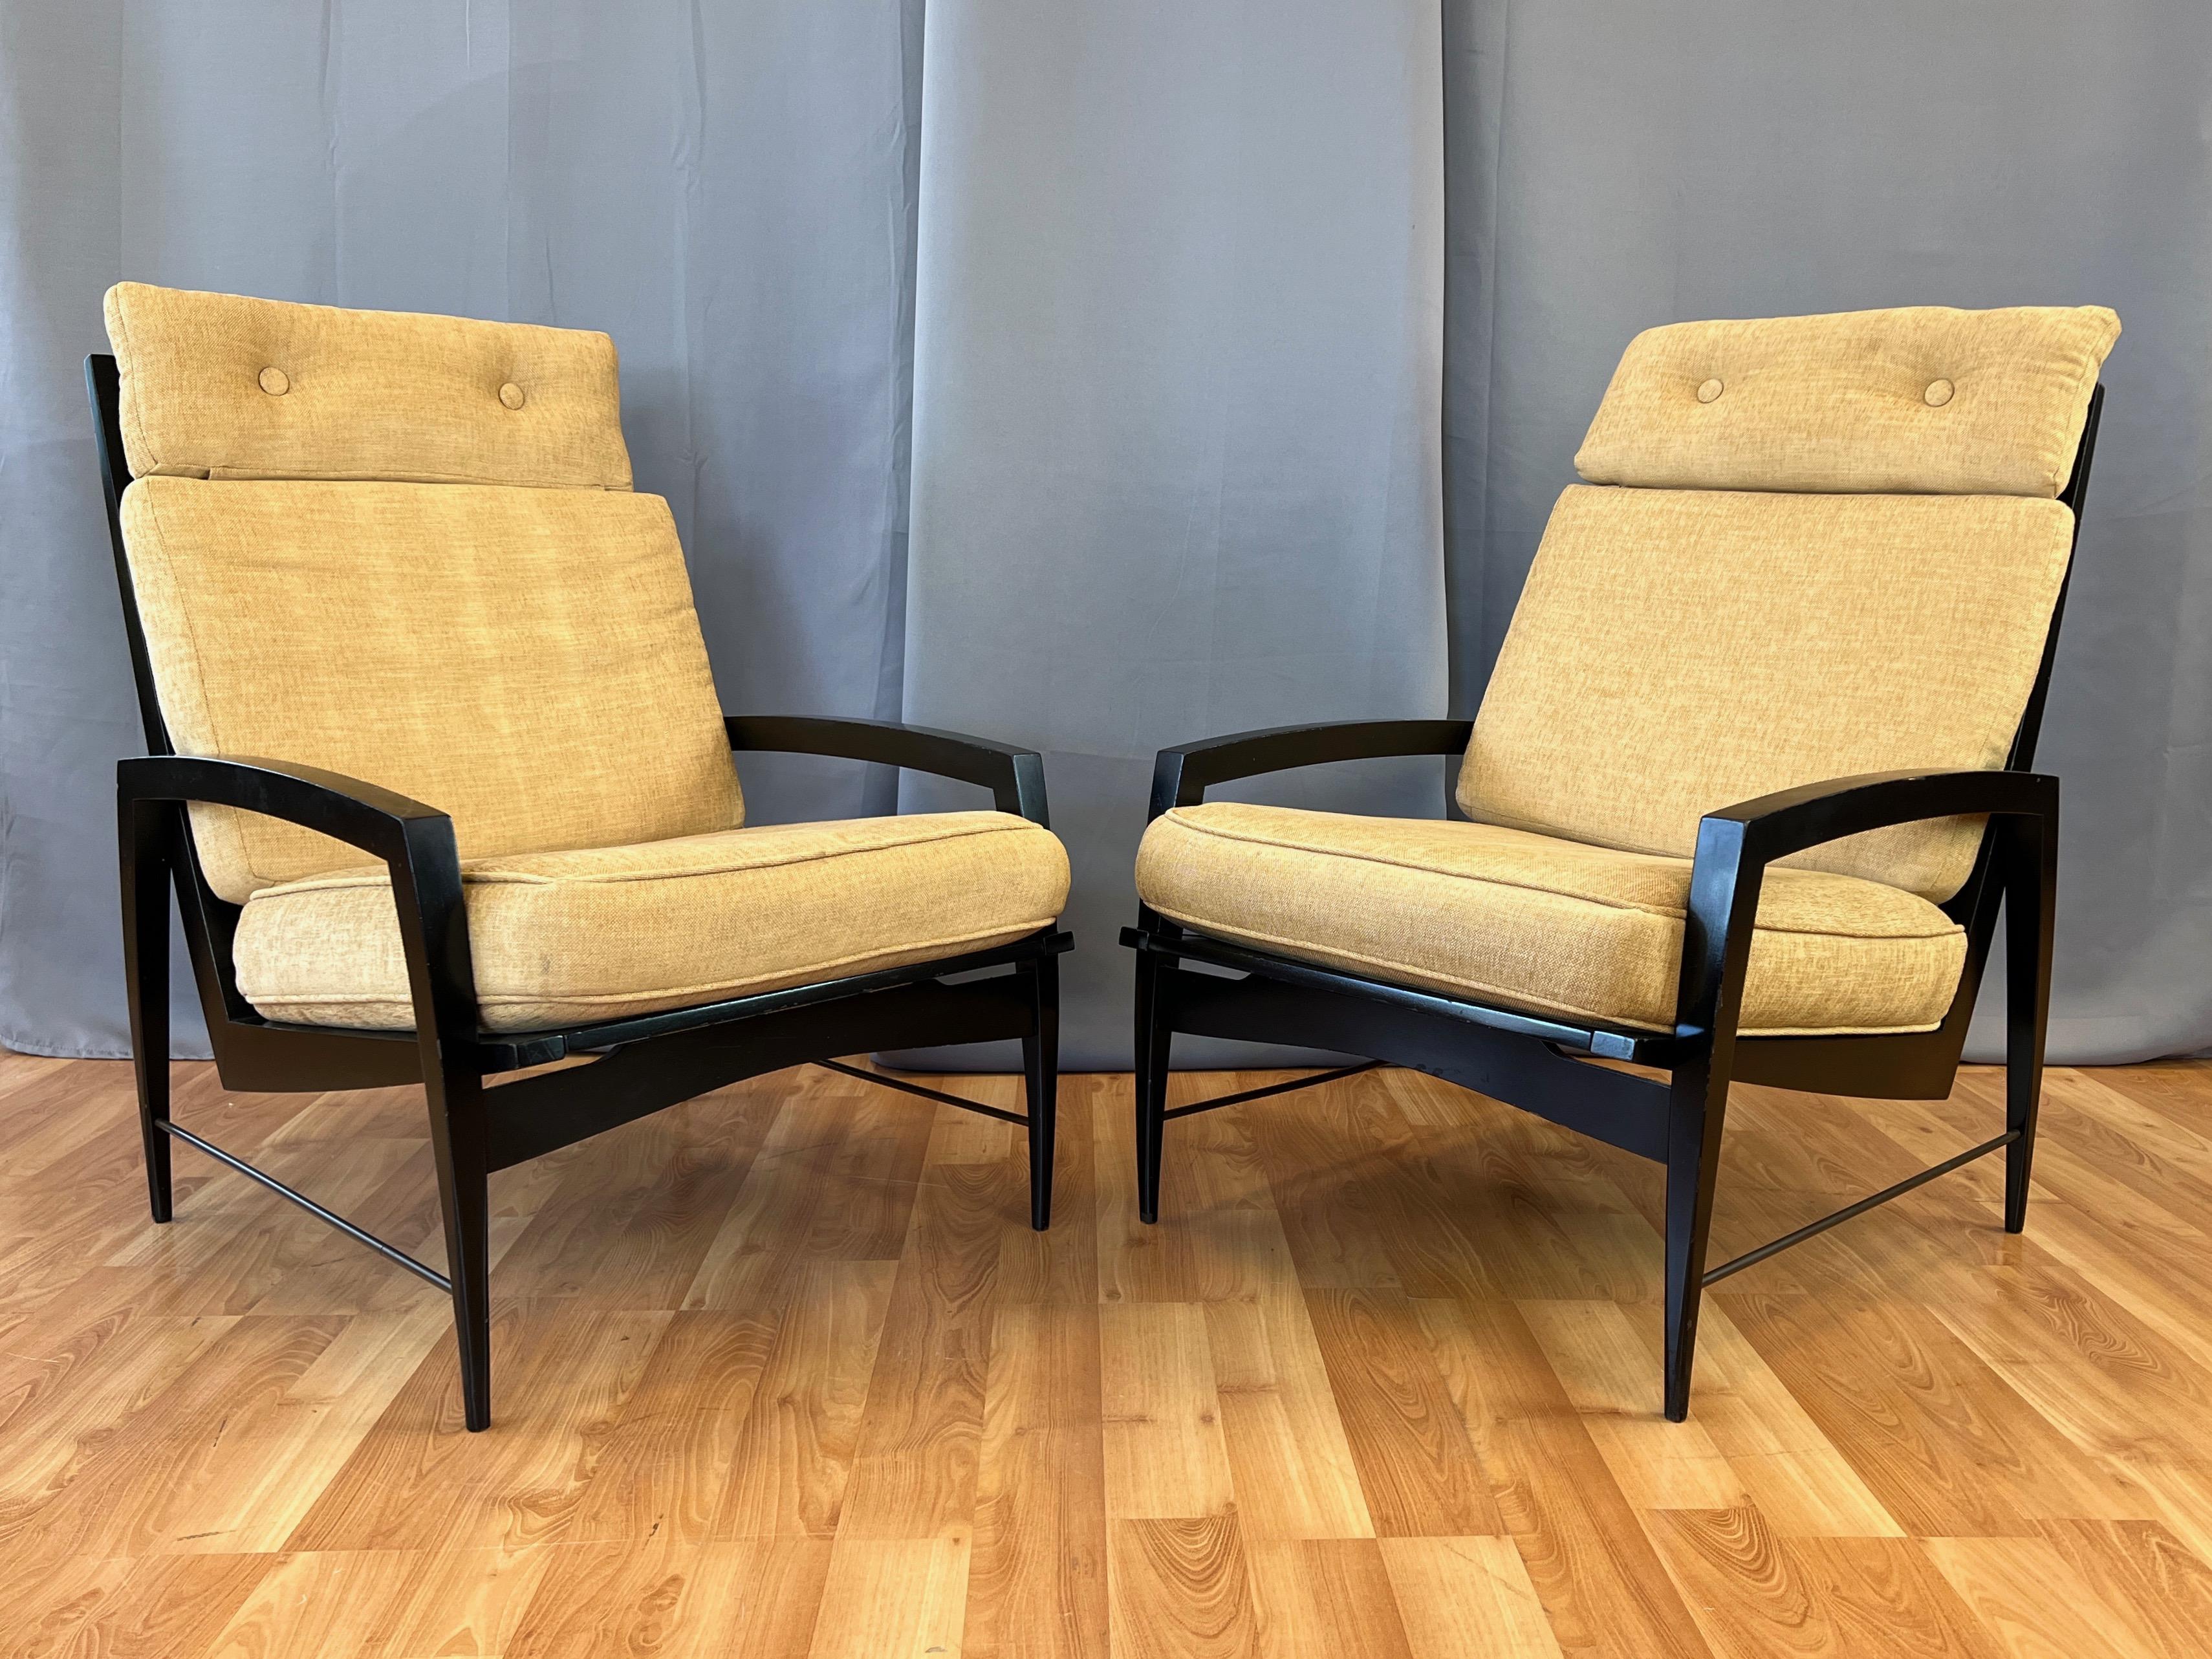 rare pair of 1950s black lacquered high-back upholstered lounge chairs by Dan Johnson for Selig.

Features elegantly tapered opposing curvilinear lines with a distinctive yet timeless mid-century modern aesthetic. High back with fin-like slats